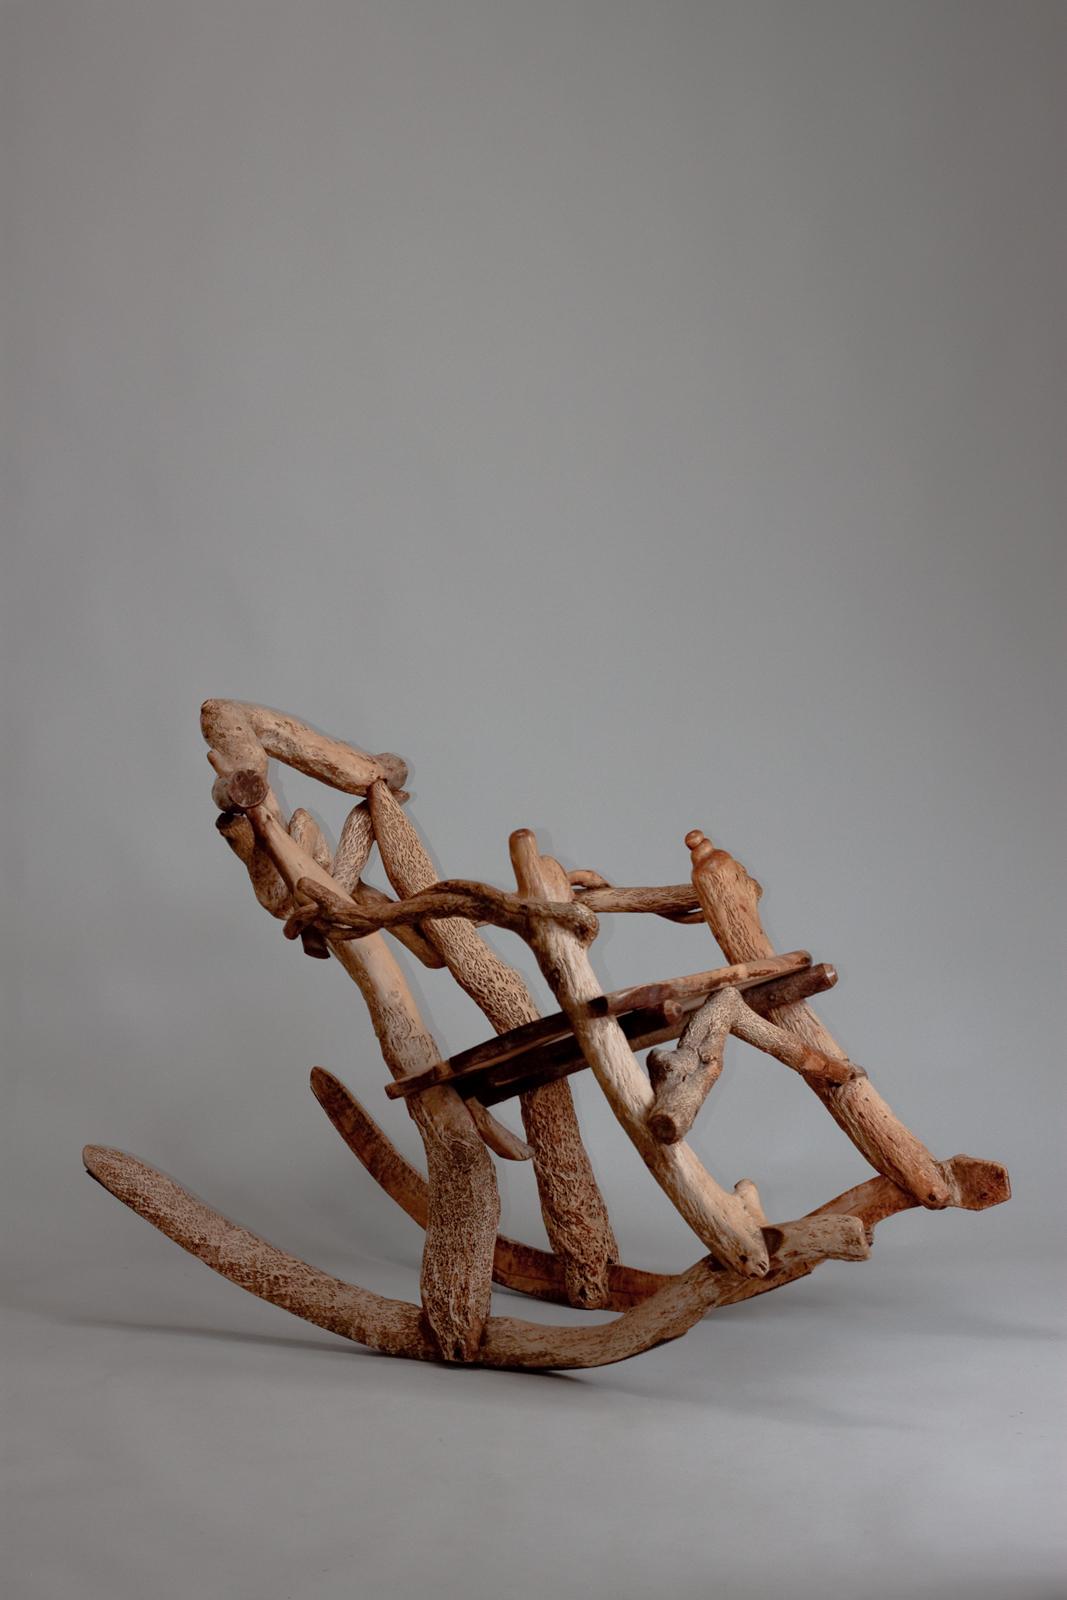 Finnish Sculptural rocking chair made from tree roots. Matti Savijärvi made these kind of chairs and often gave them as gifts to his artist friends, such as Jean Sibelius and Pekka Halonen.